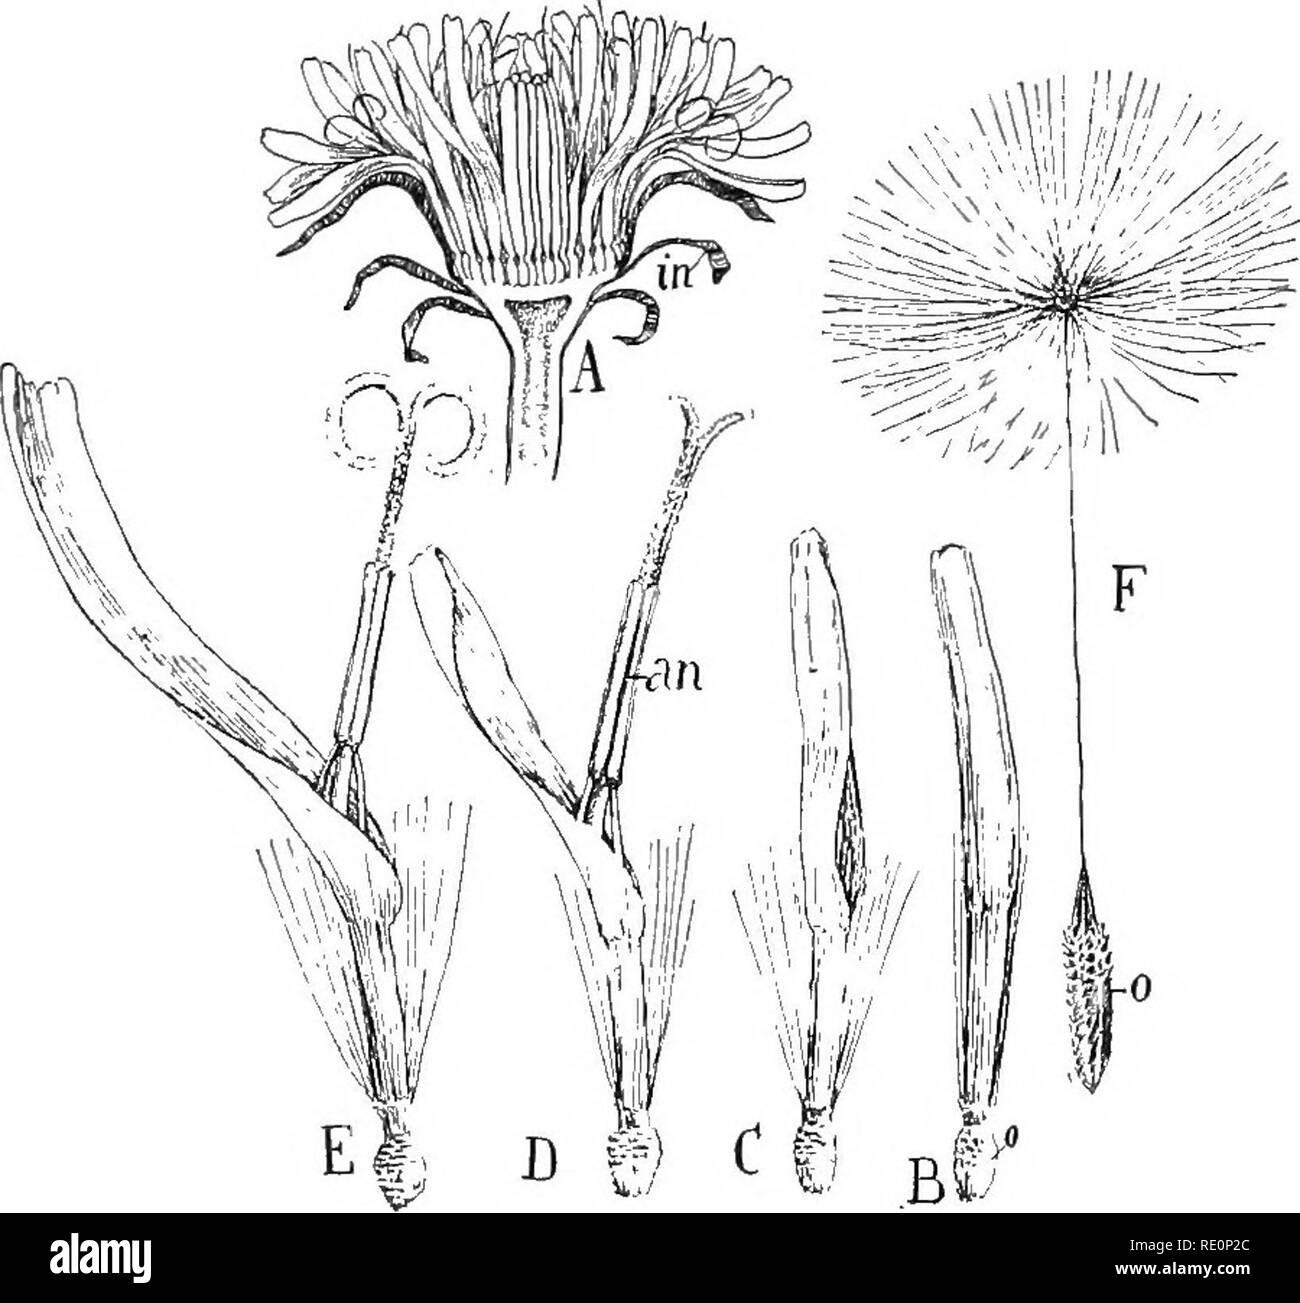 . Nature and development of plants. Botany. 486 THE CAMPANULALES flowers in heads subtended by one or more rows of bracts that form a calyx-like involucre (Fig. 338, in). This type of in- florescence might readily be mistaken for a single flower as the buttercup, rose, etc. This tendency to group the flowers in heads and compact clusters has been attained in several orders, notably the mustards, peas, Umbelliferae, mints, scrophularias, and especially in the Teasel family, page 482. But in no group has the aggregation been so successful and coupled with such efficient types of flowers. Leaving Stock Photo